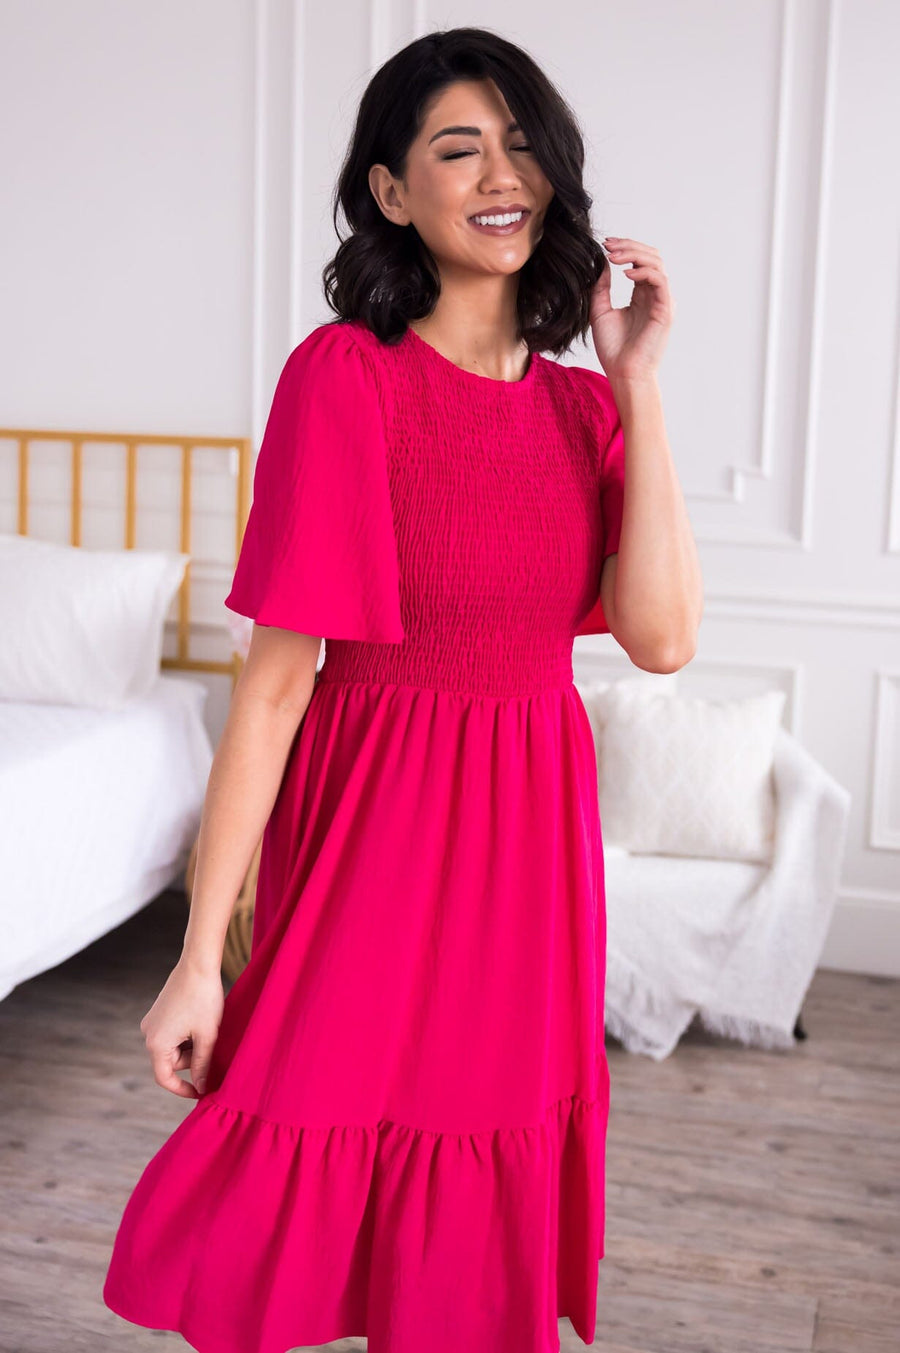 Shop Modest Dresses for Women | Conservative Clothing Page 6 - NeeSee's ...